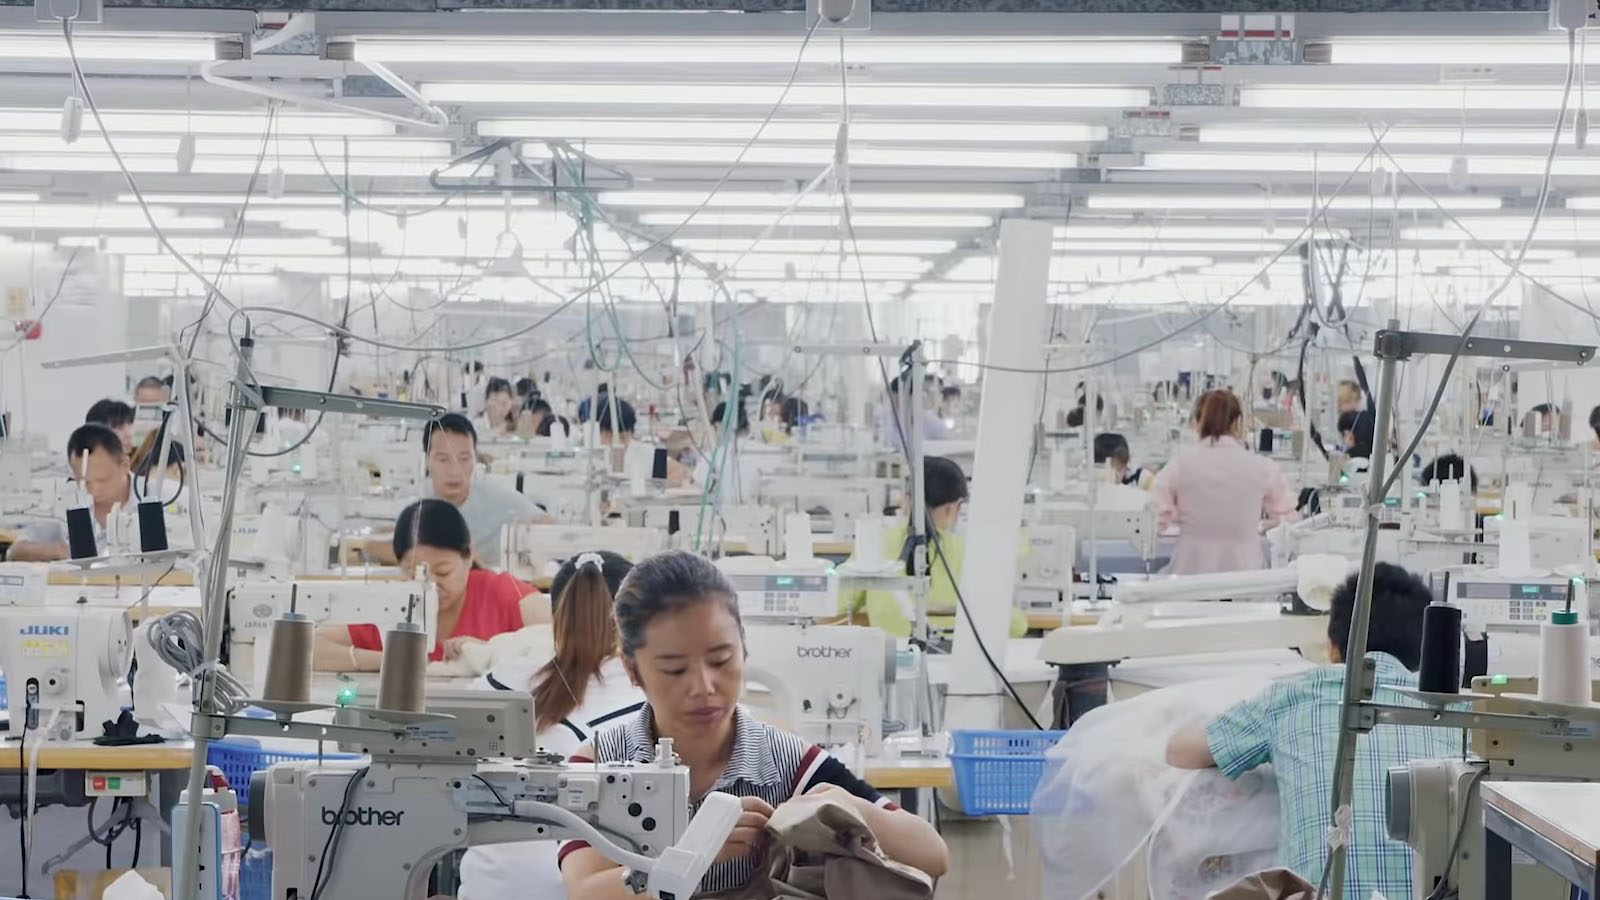 Mass production drives the Chinese economy as well as the global supply chain. Image © MTV Documentary Films